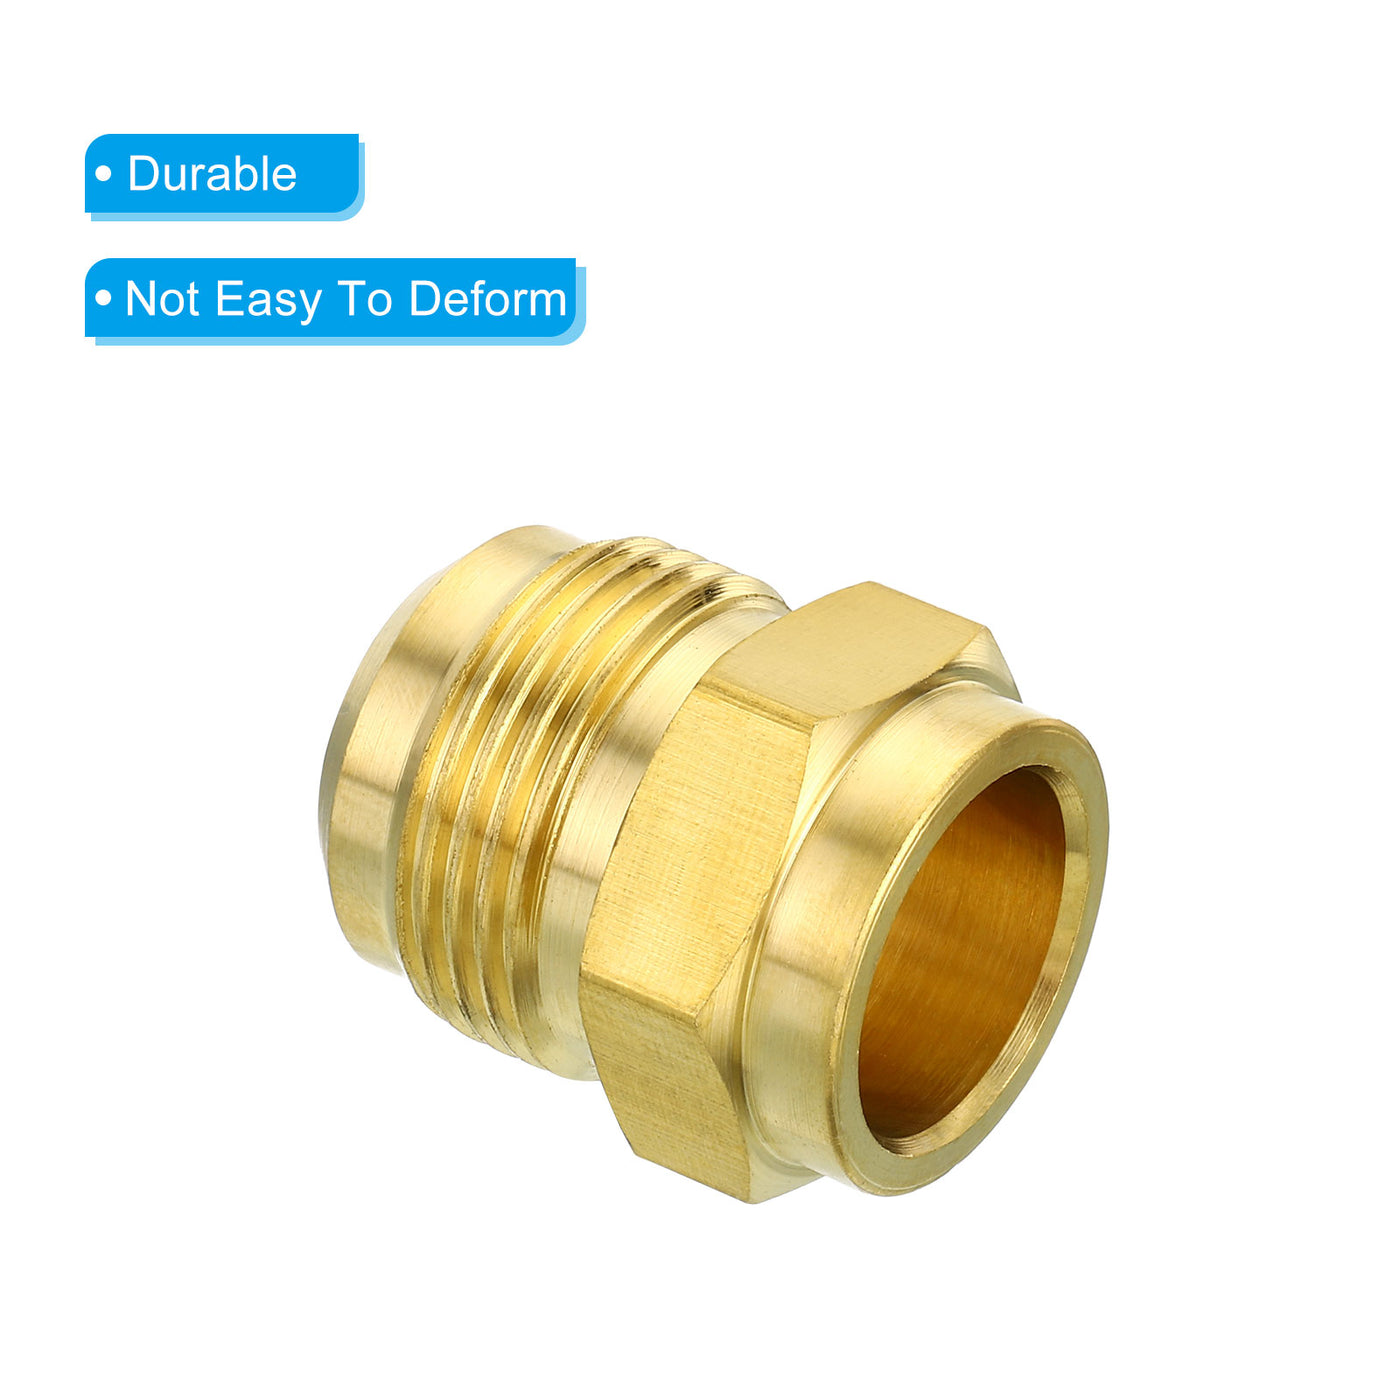 Harfington 3/4 SAE Male Thread Brass Flare Tube Fitting, Pipe Adapter Connector for Plumbing HVAC Air Conditioner